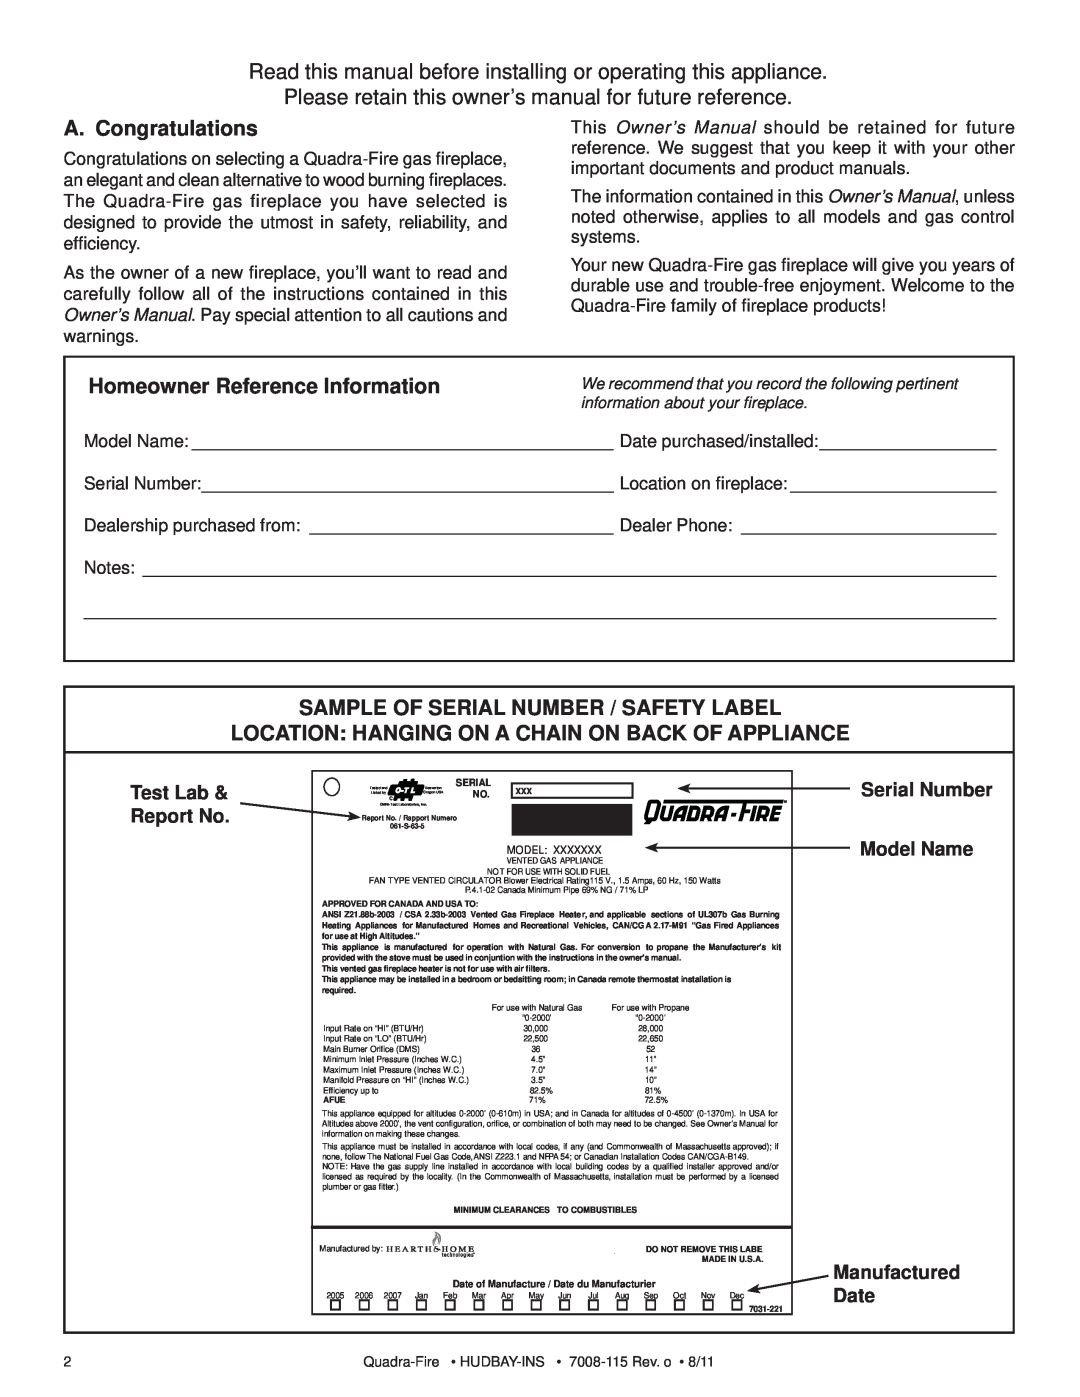 Quadra-Fire 7008-115 A. Congratulations, Homeowner Reference Information, Sample Of Serial Number / Safety Label 